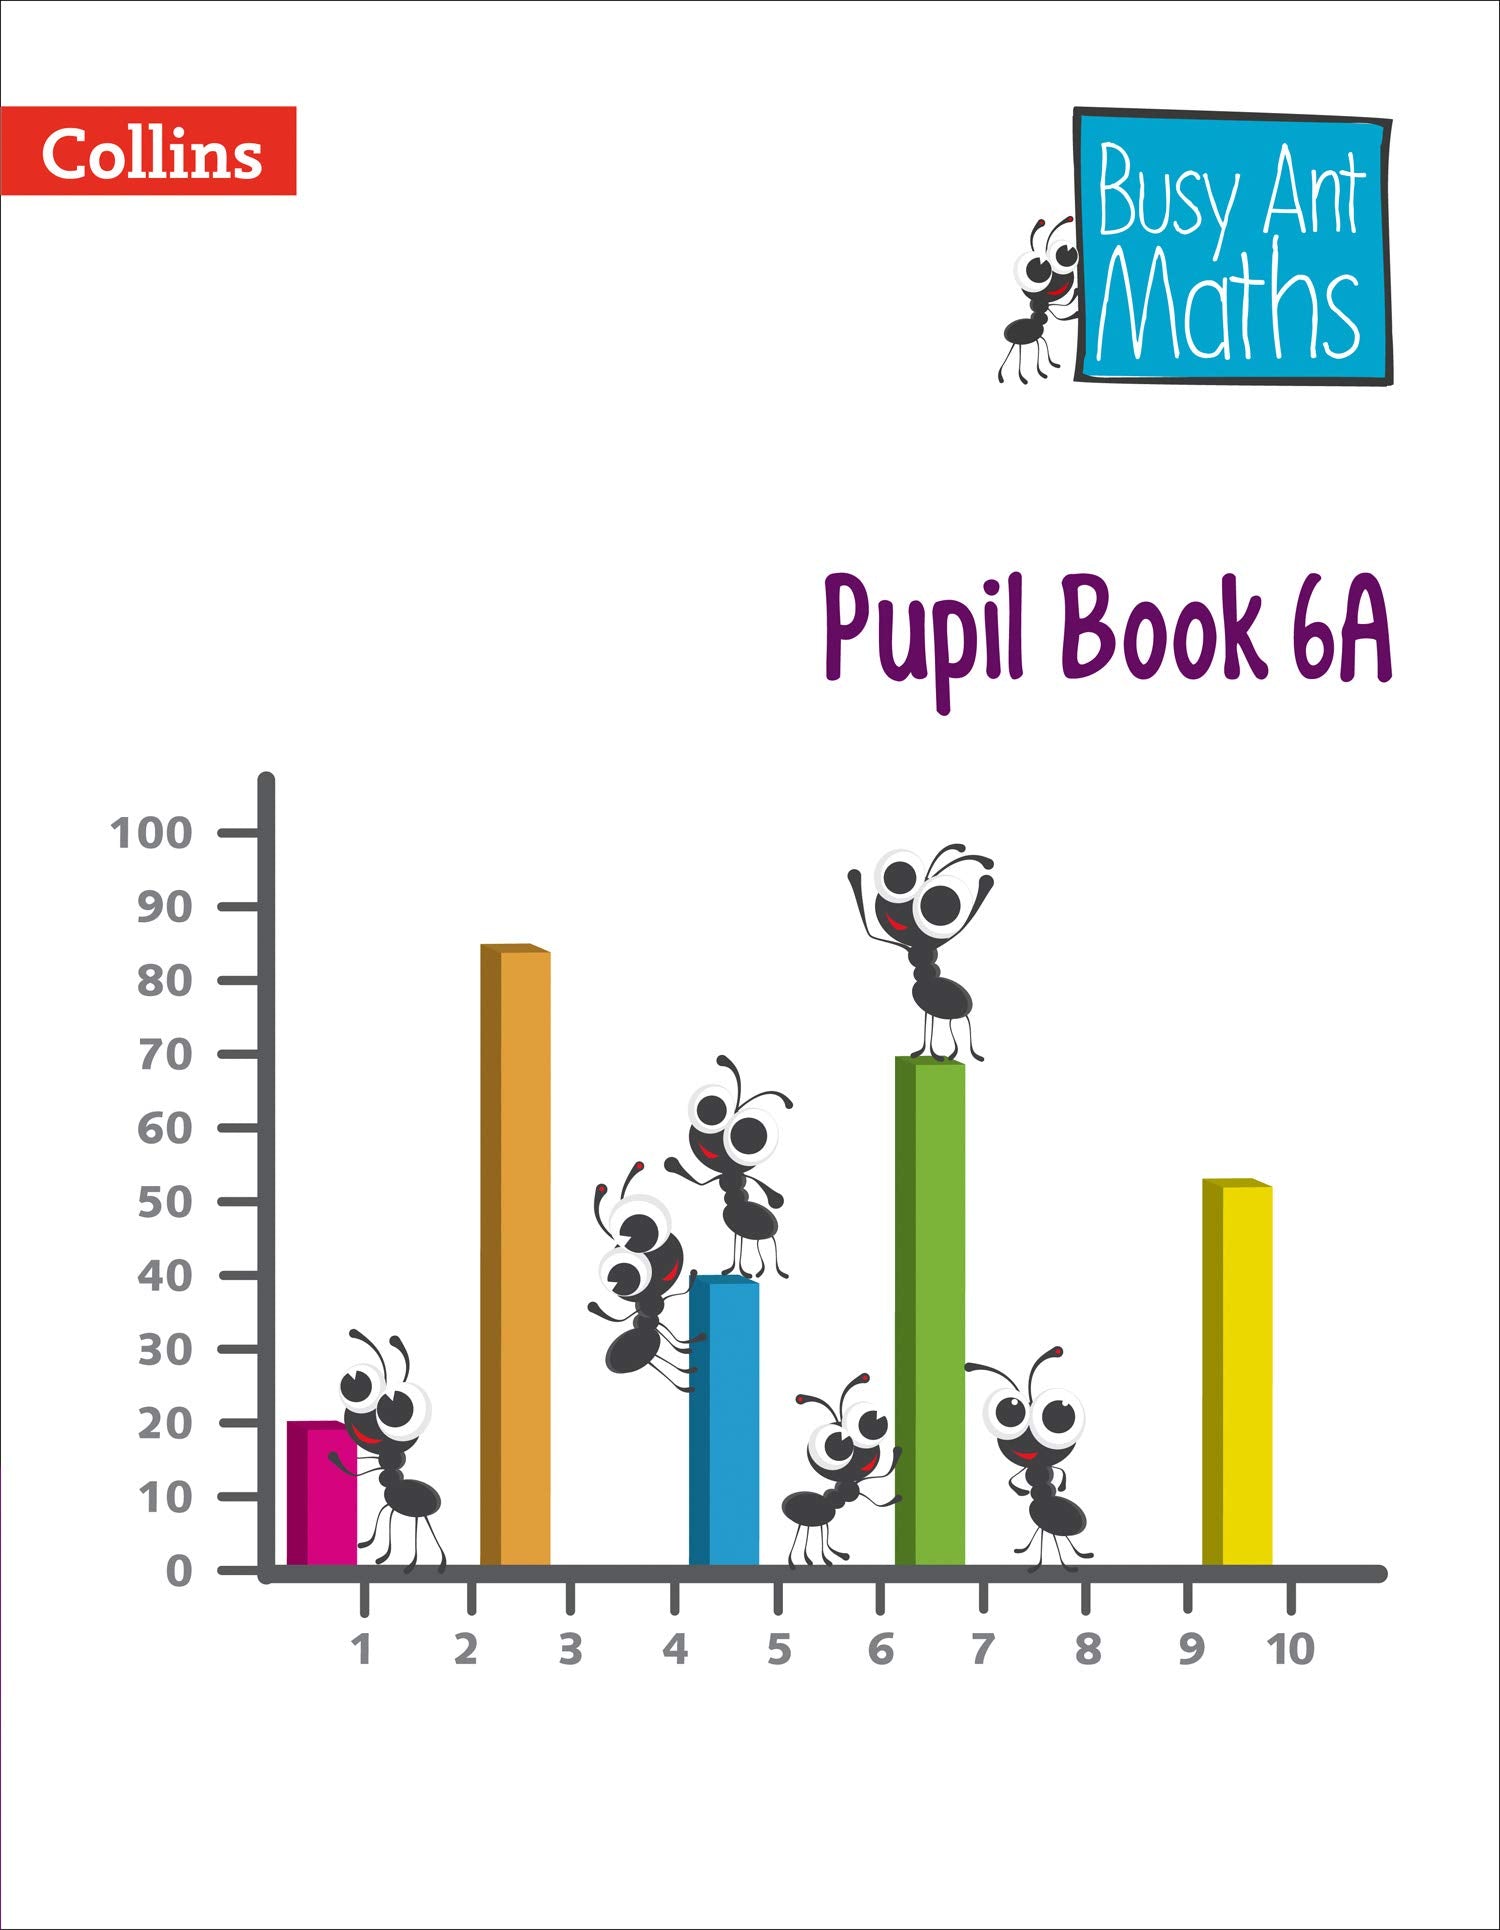 Busy Ant Maths - Pupil Book 6A